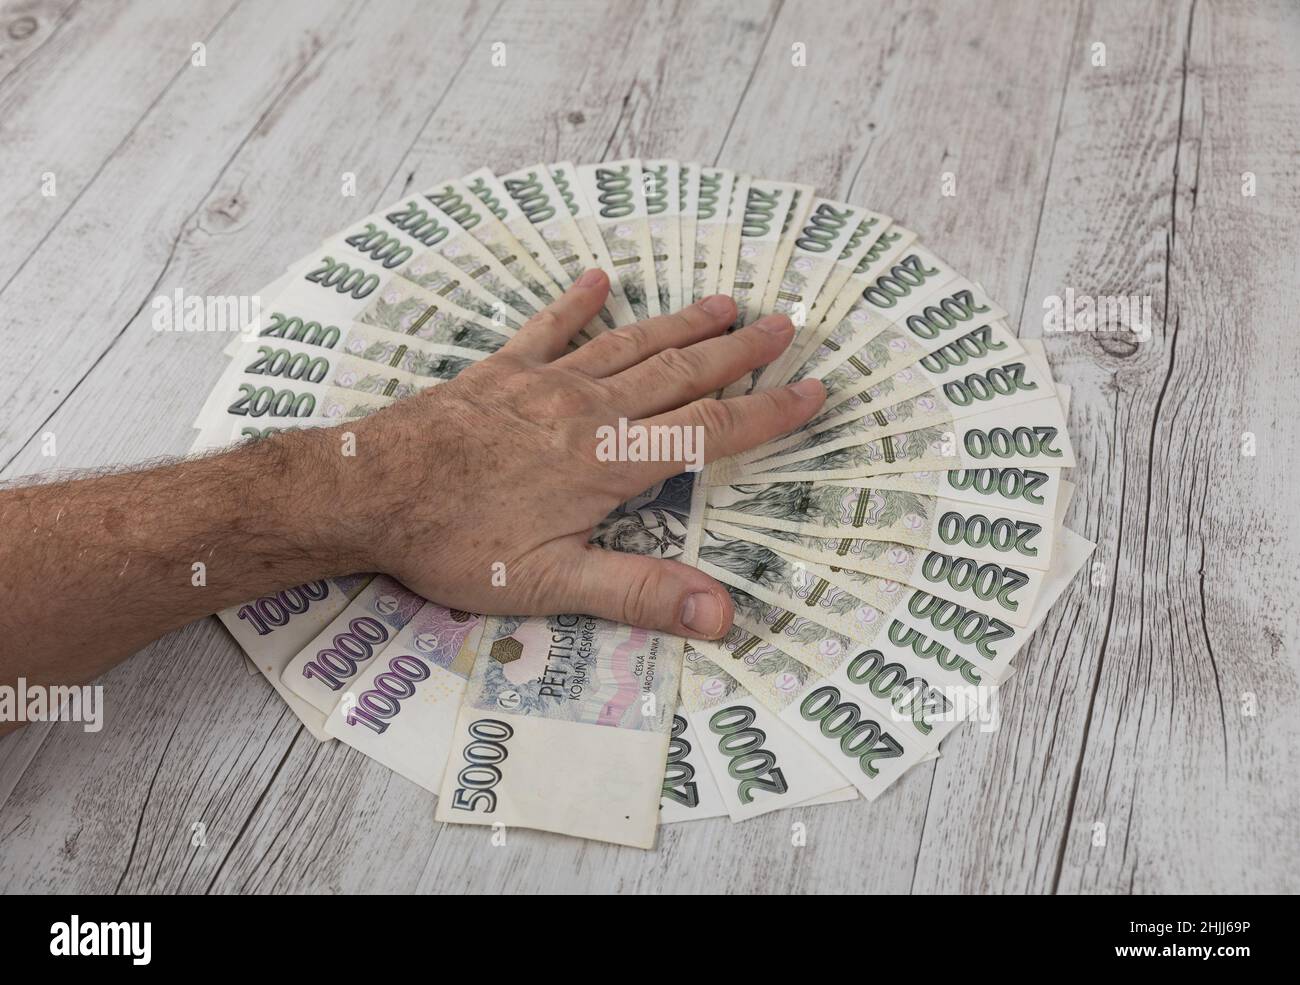 Czech banknotes in a fan and the hands of a merchant placed on them. Financial concept.Financial concept in Czech currency. business, finance, saving Stock Photo